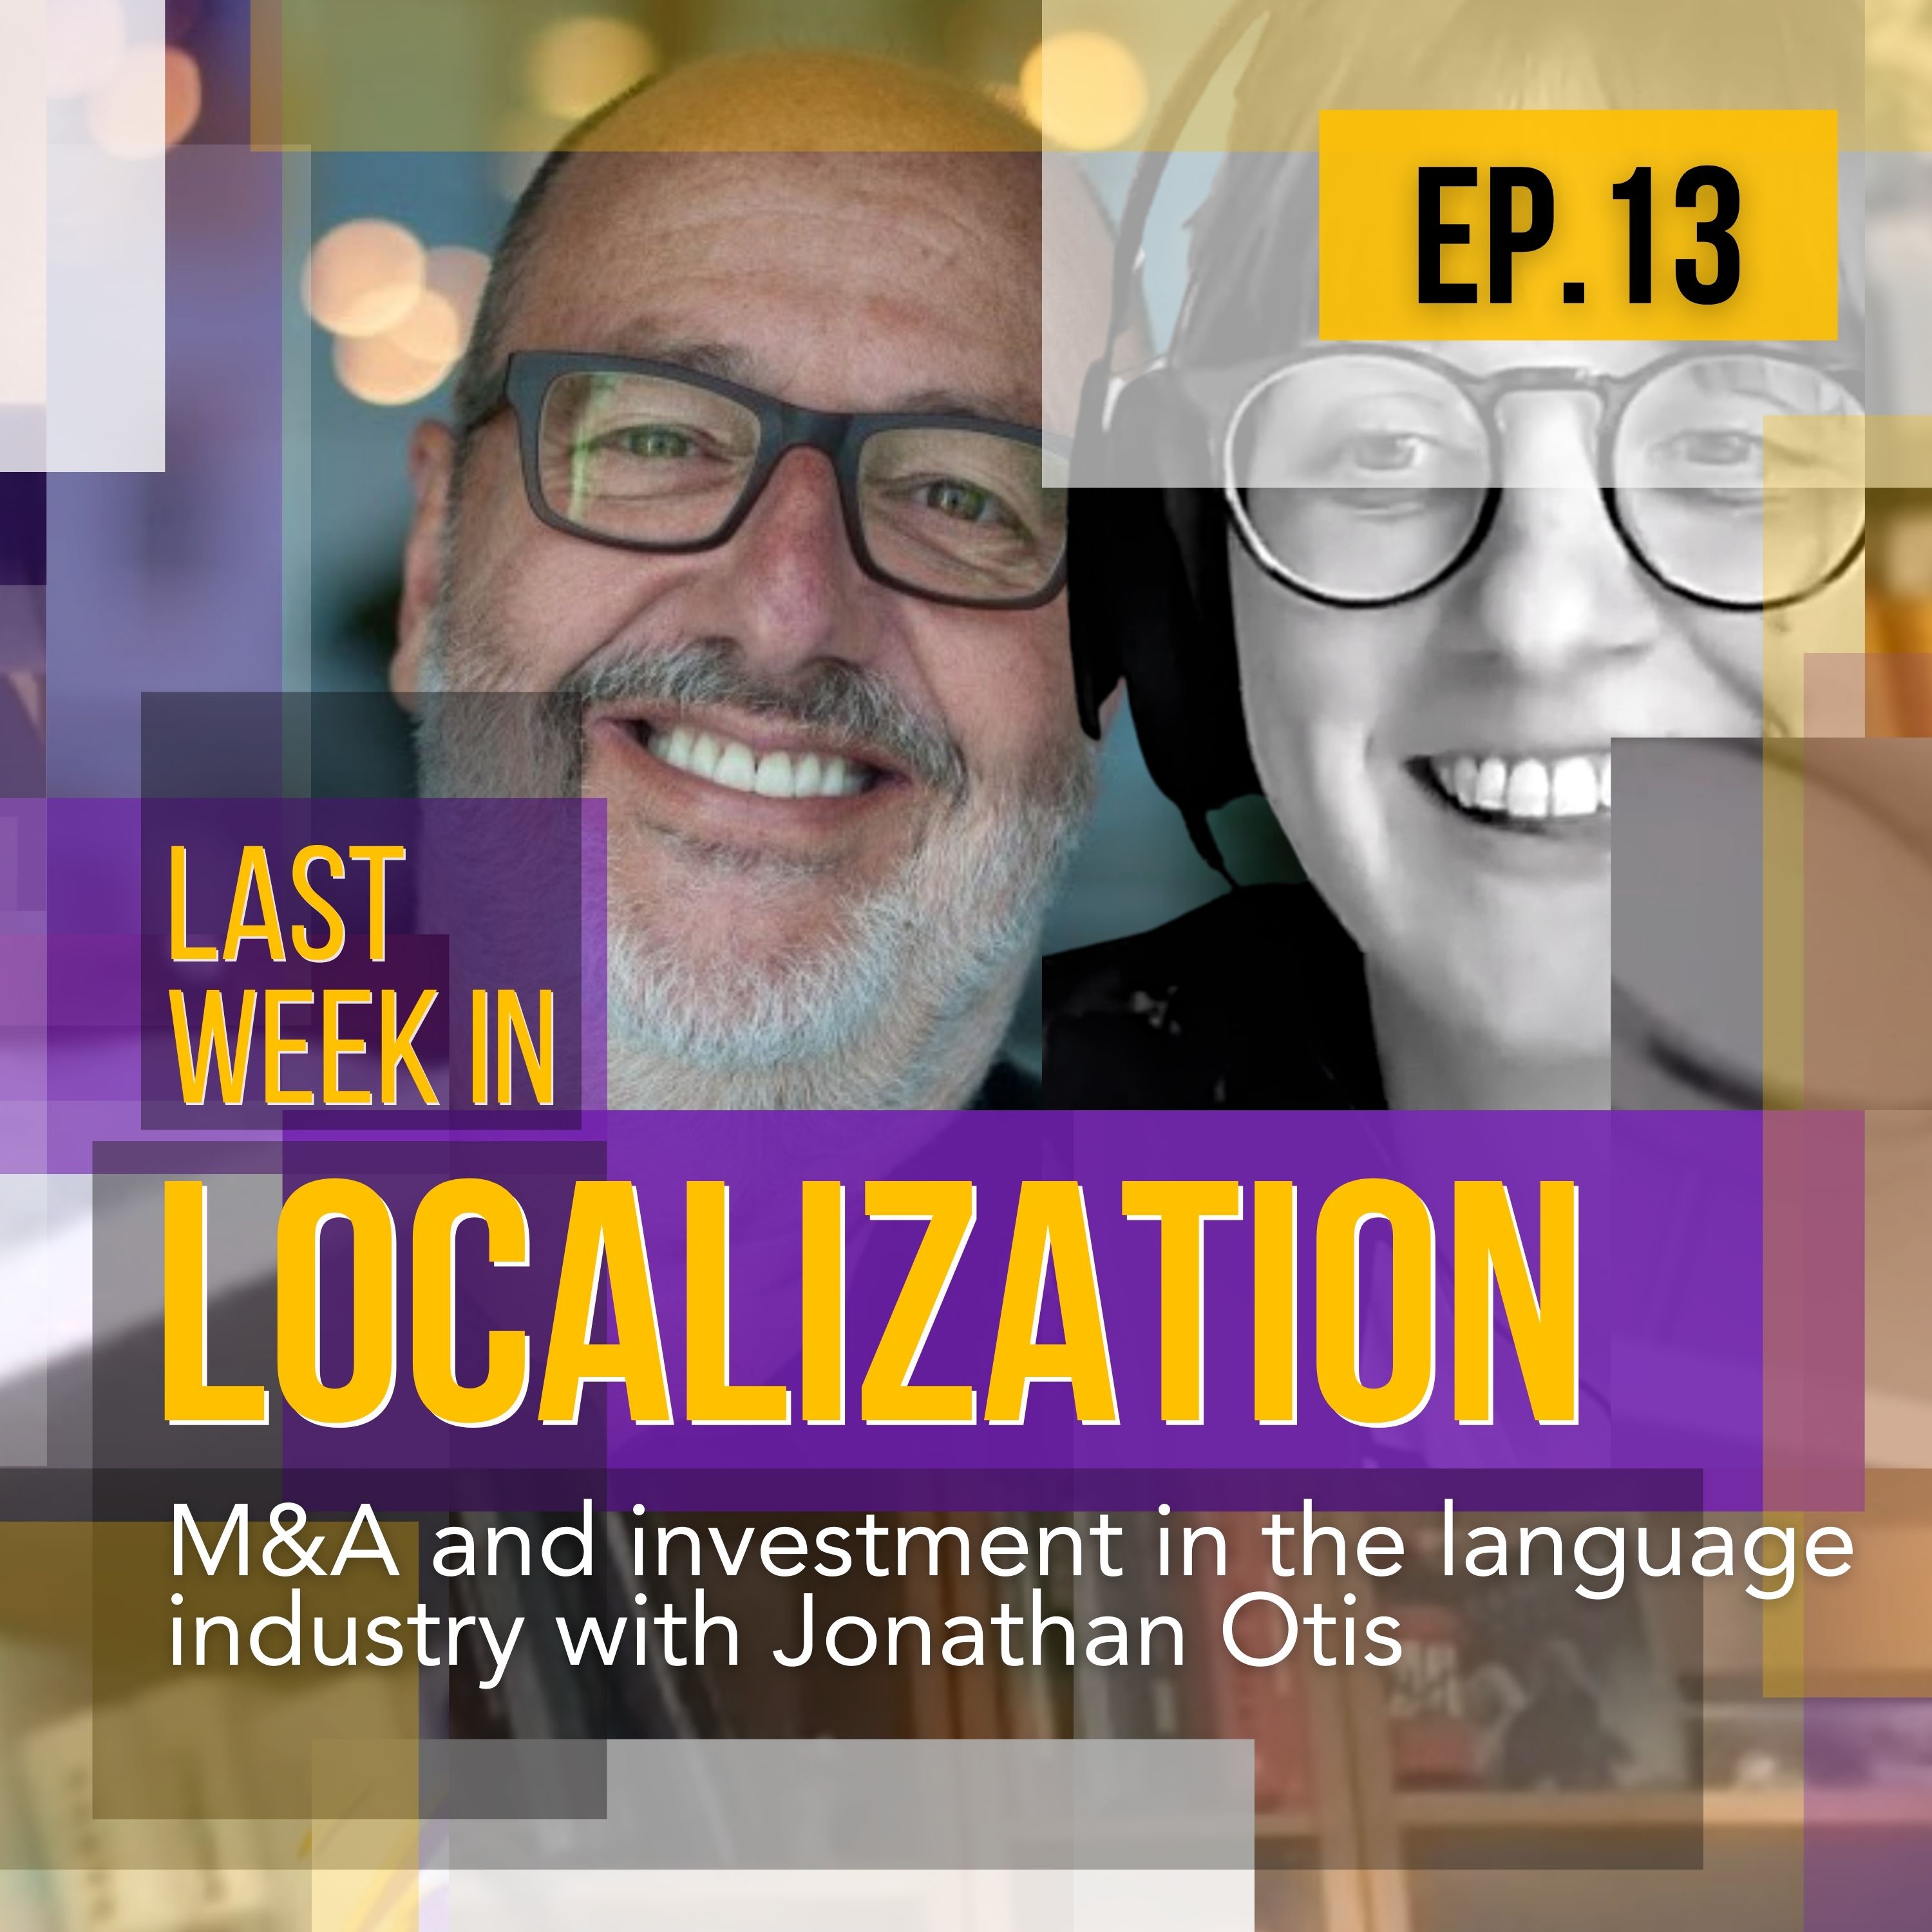 M&A and investment in the language industry with Jonathan Otis